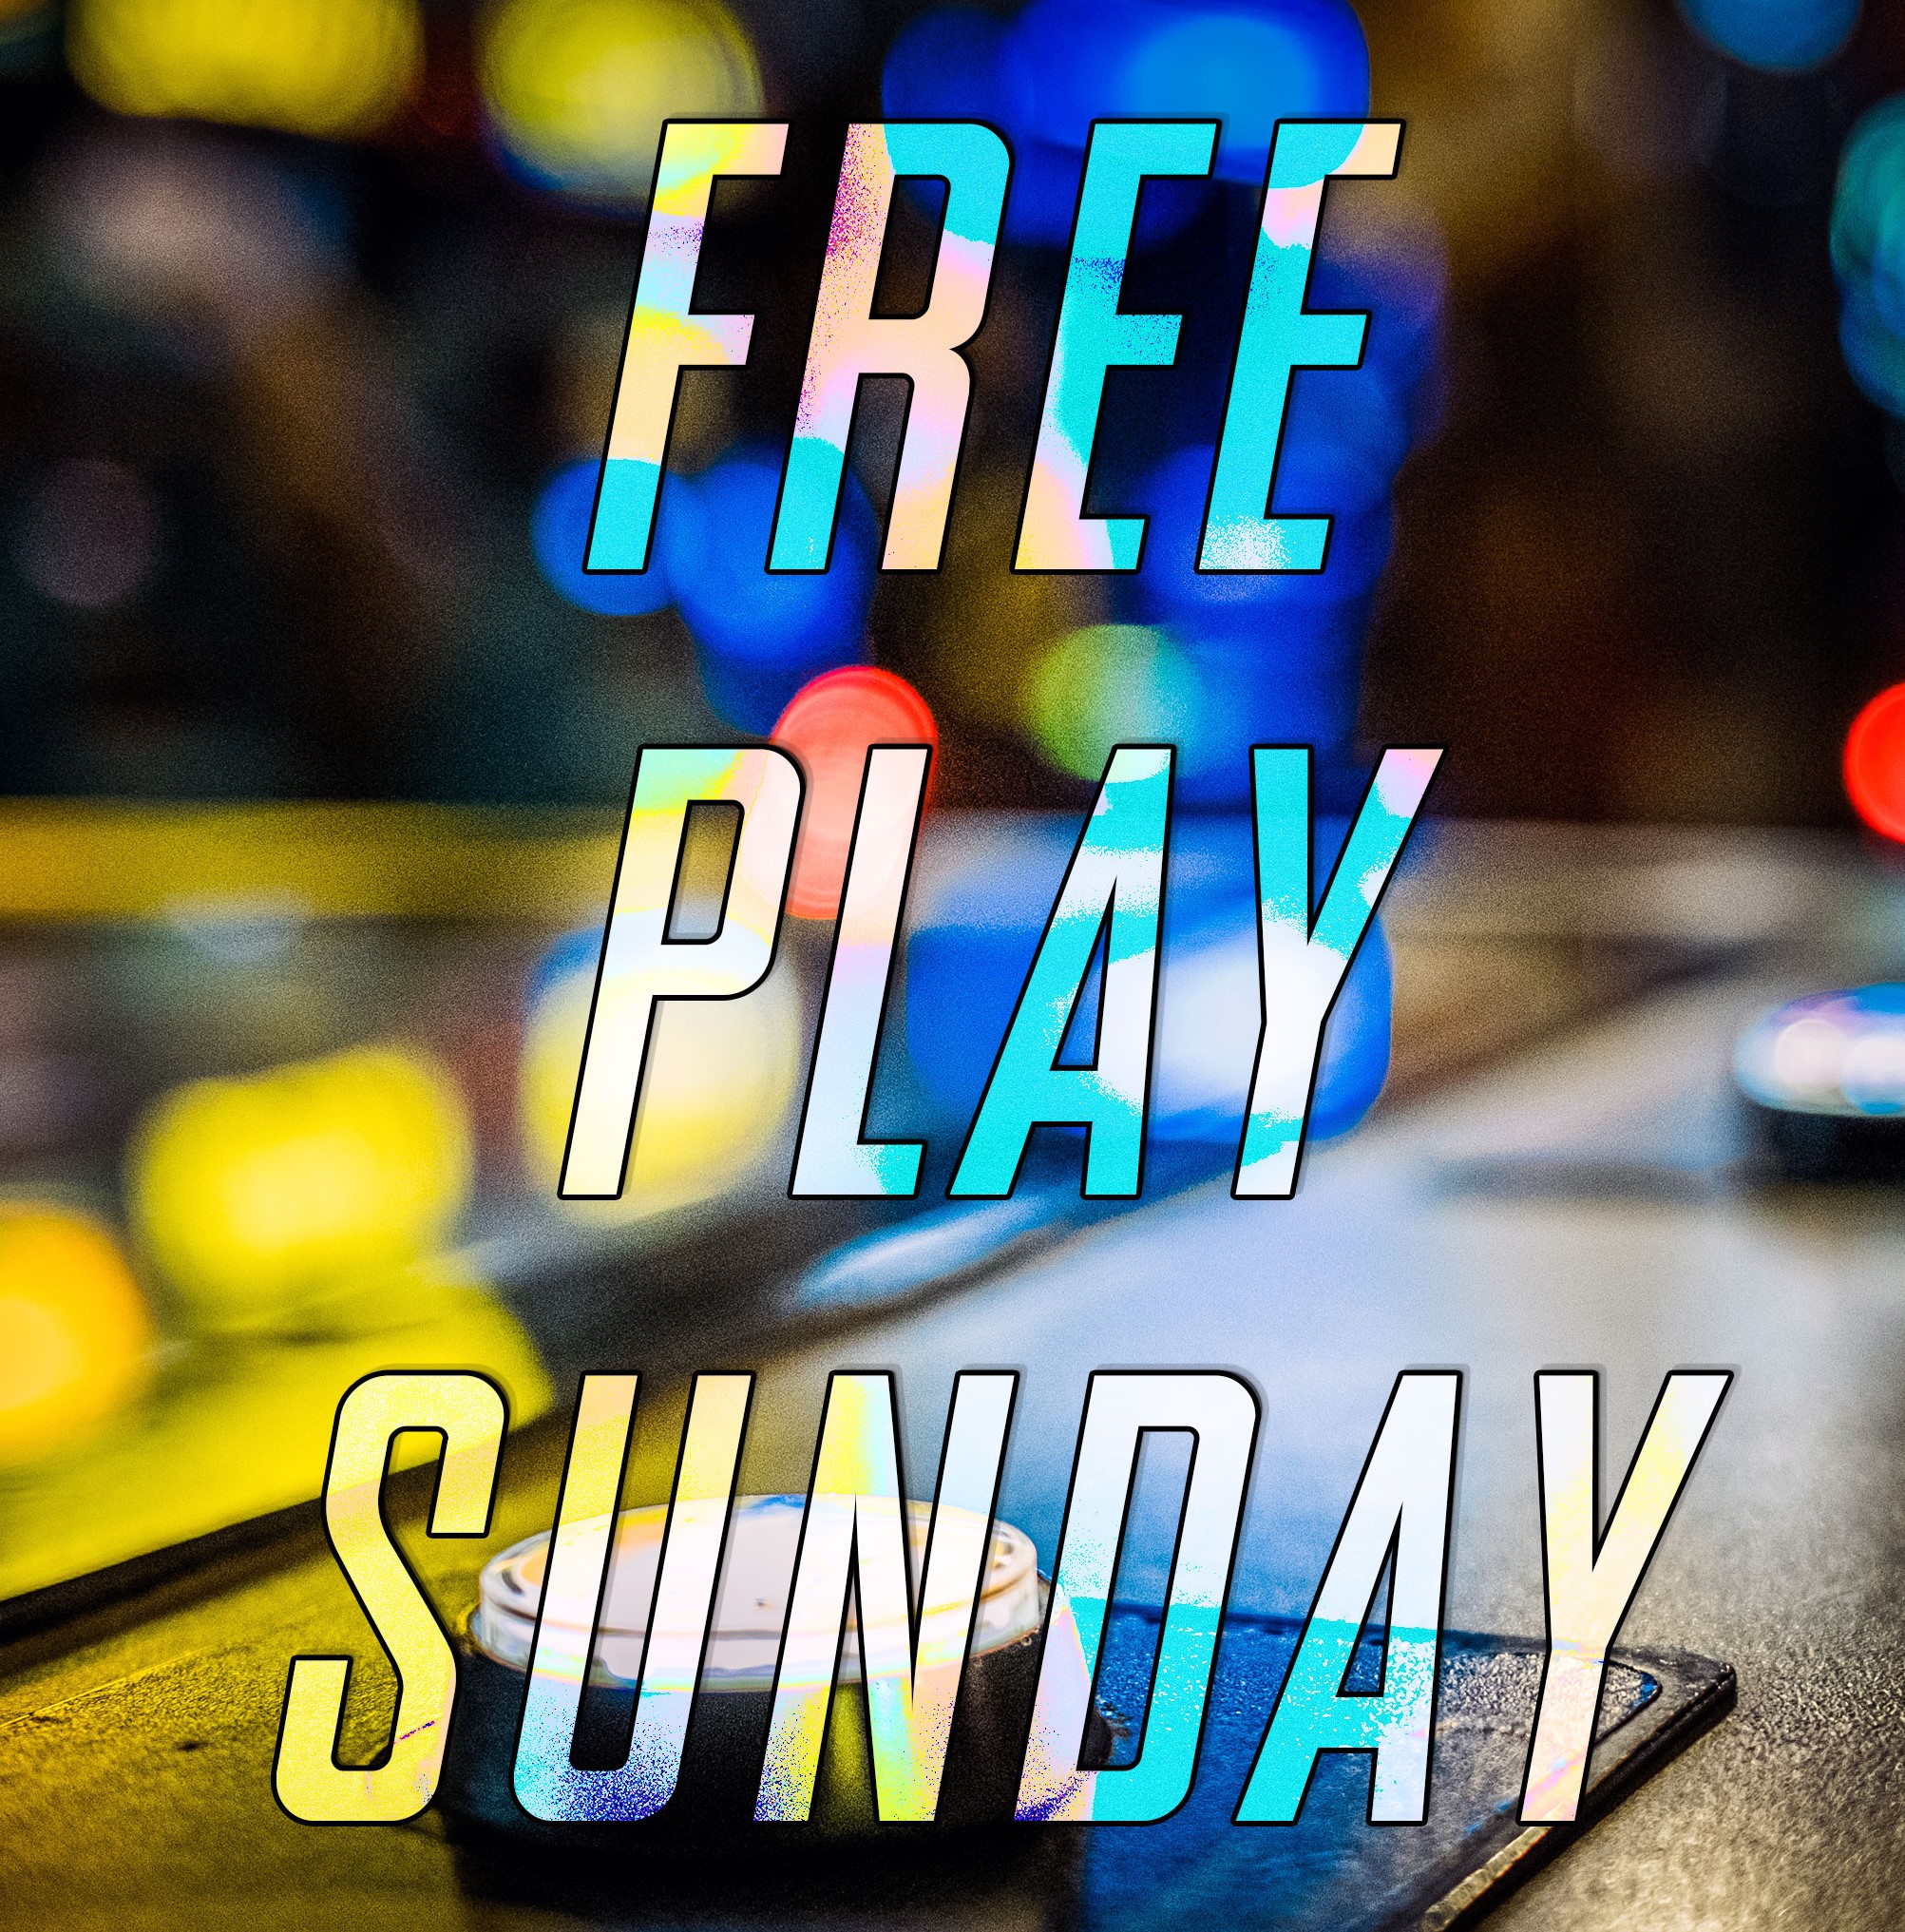 FREE PLAY SUNDAY 24th Sep @ CLUB PLAY 2PM-2AM ***FREE ENTRY OFFER! *** MORE DETAILS IN THE THREAD!